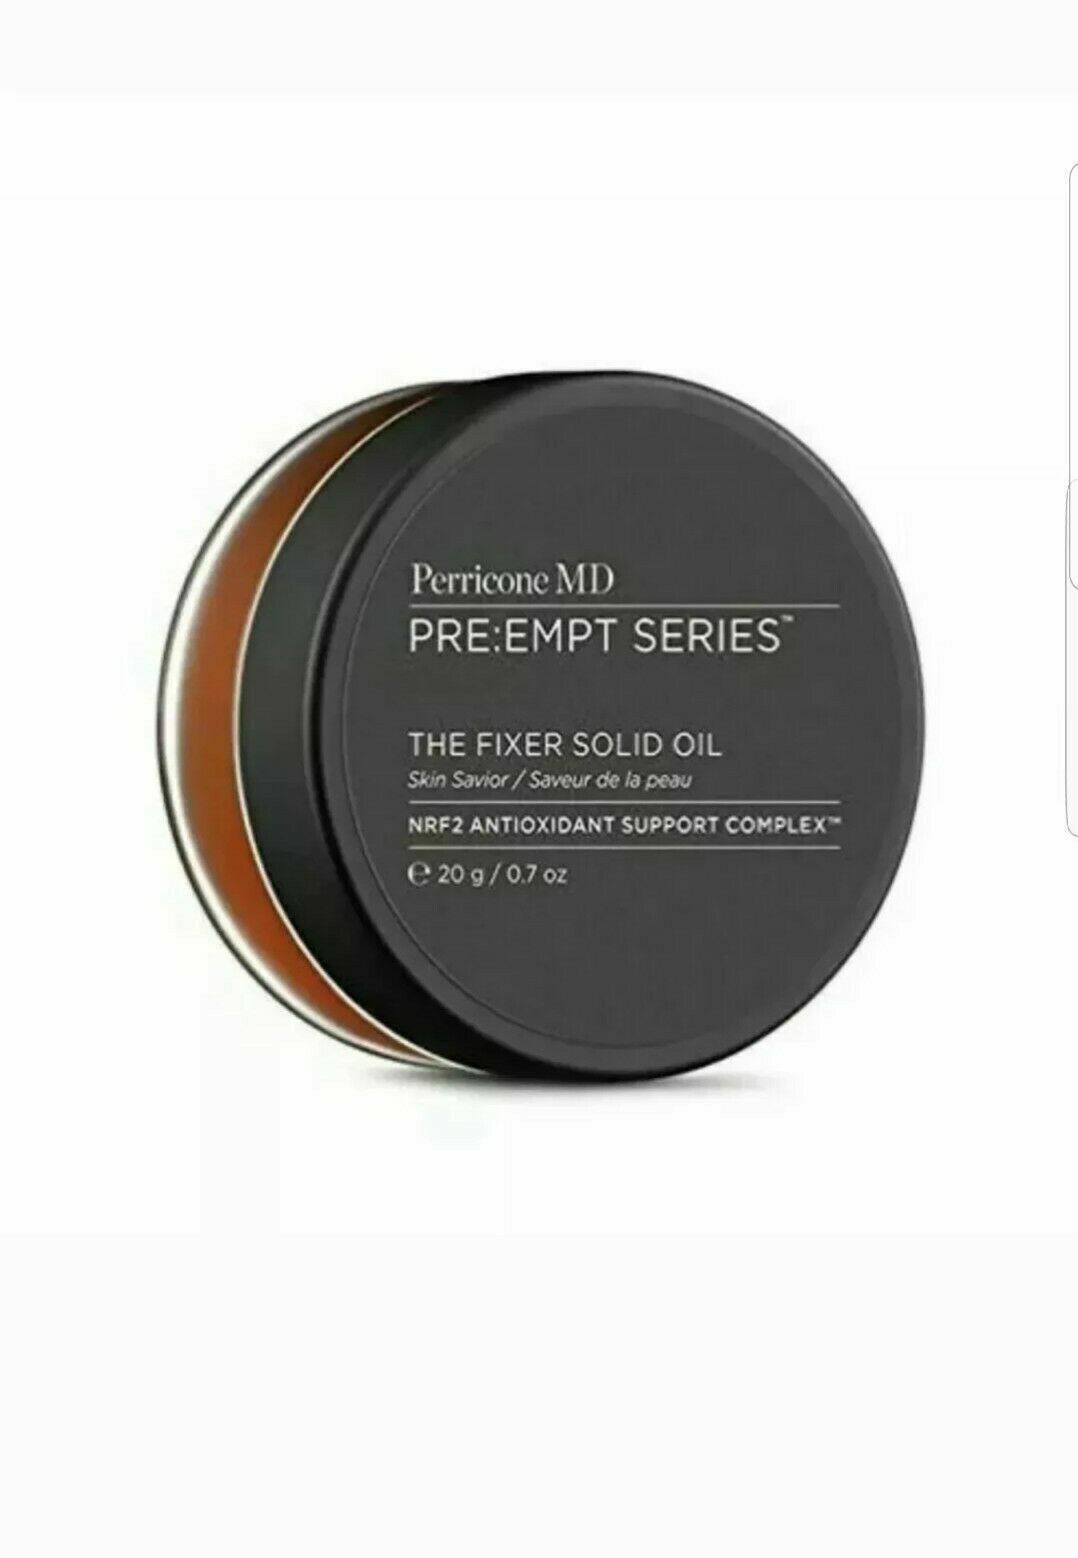 Perricone MD Pre:Empt Series The Fixer Solid Oil 20g - Jasmine Parfums- [ean]